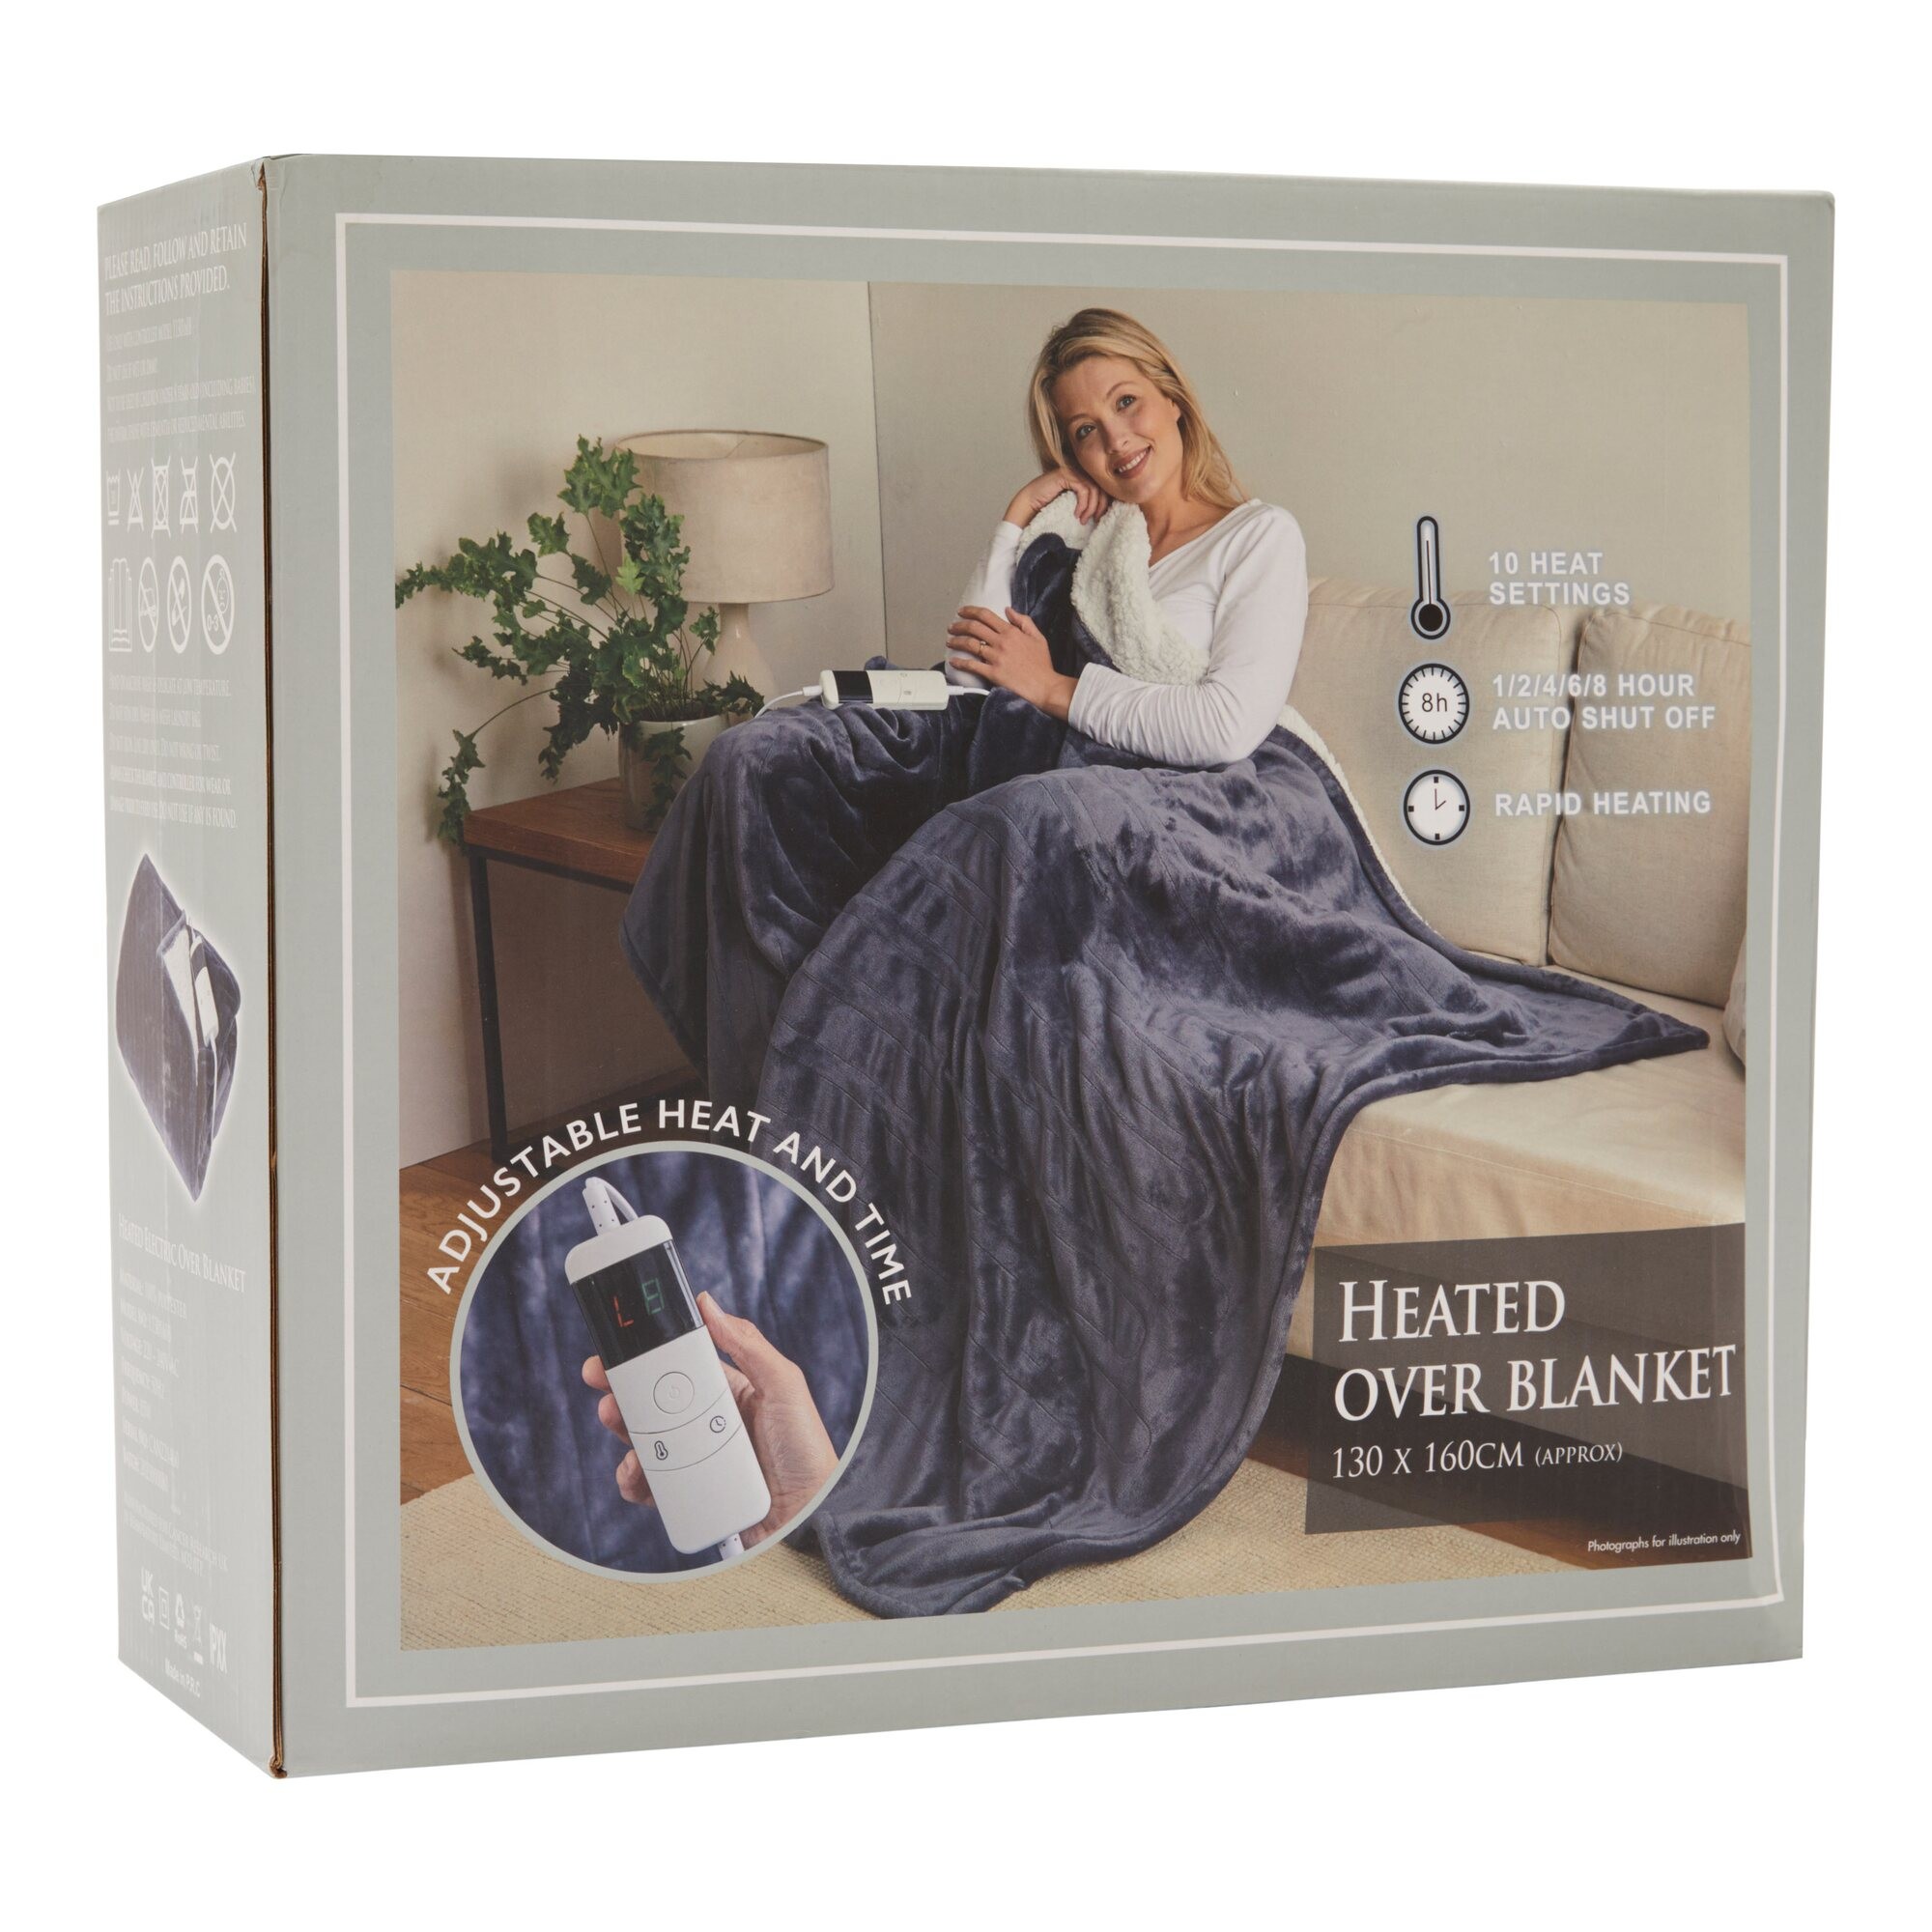 https://shop.cancerresearchuk.org/sites/default/files/styles/product_details_zoom/public/CX76379-Heated-Over-Blanket-Cancer-Research-UK-Online-Shop.jpg?itok=xfeHT6DA